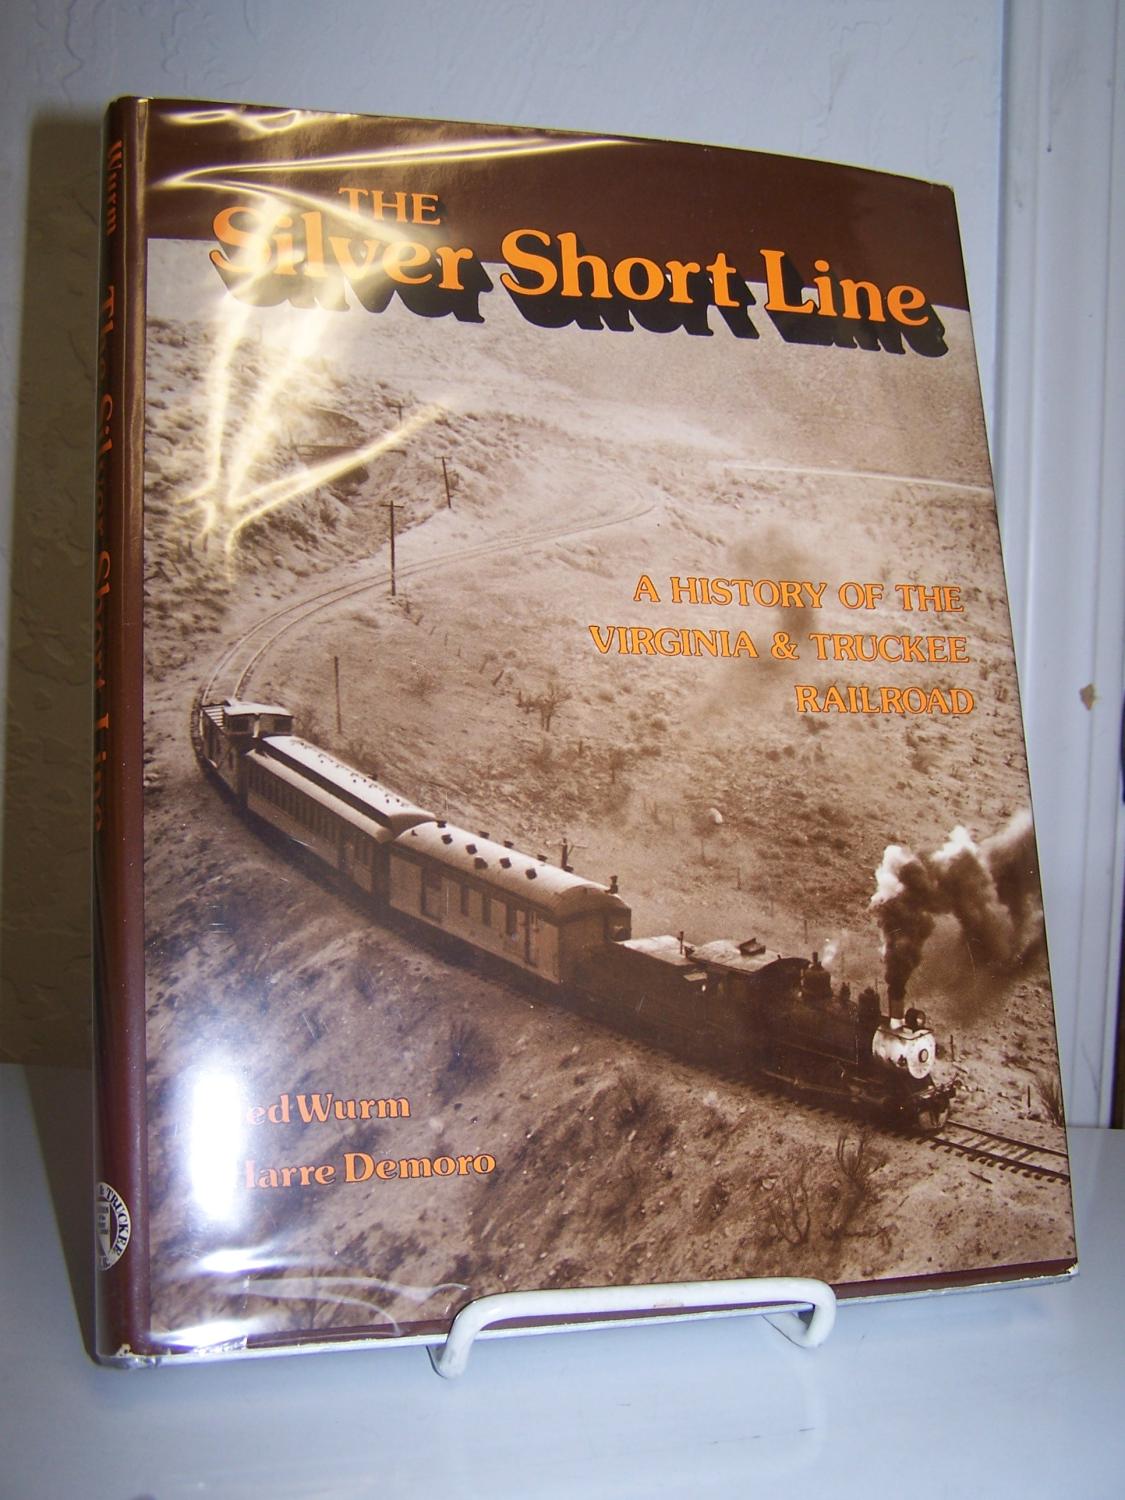 The Silver Short Line: A History of the Virginia & Truckee Railroad. - Wurm, Ted and Harre Demoro.